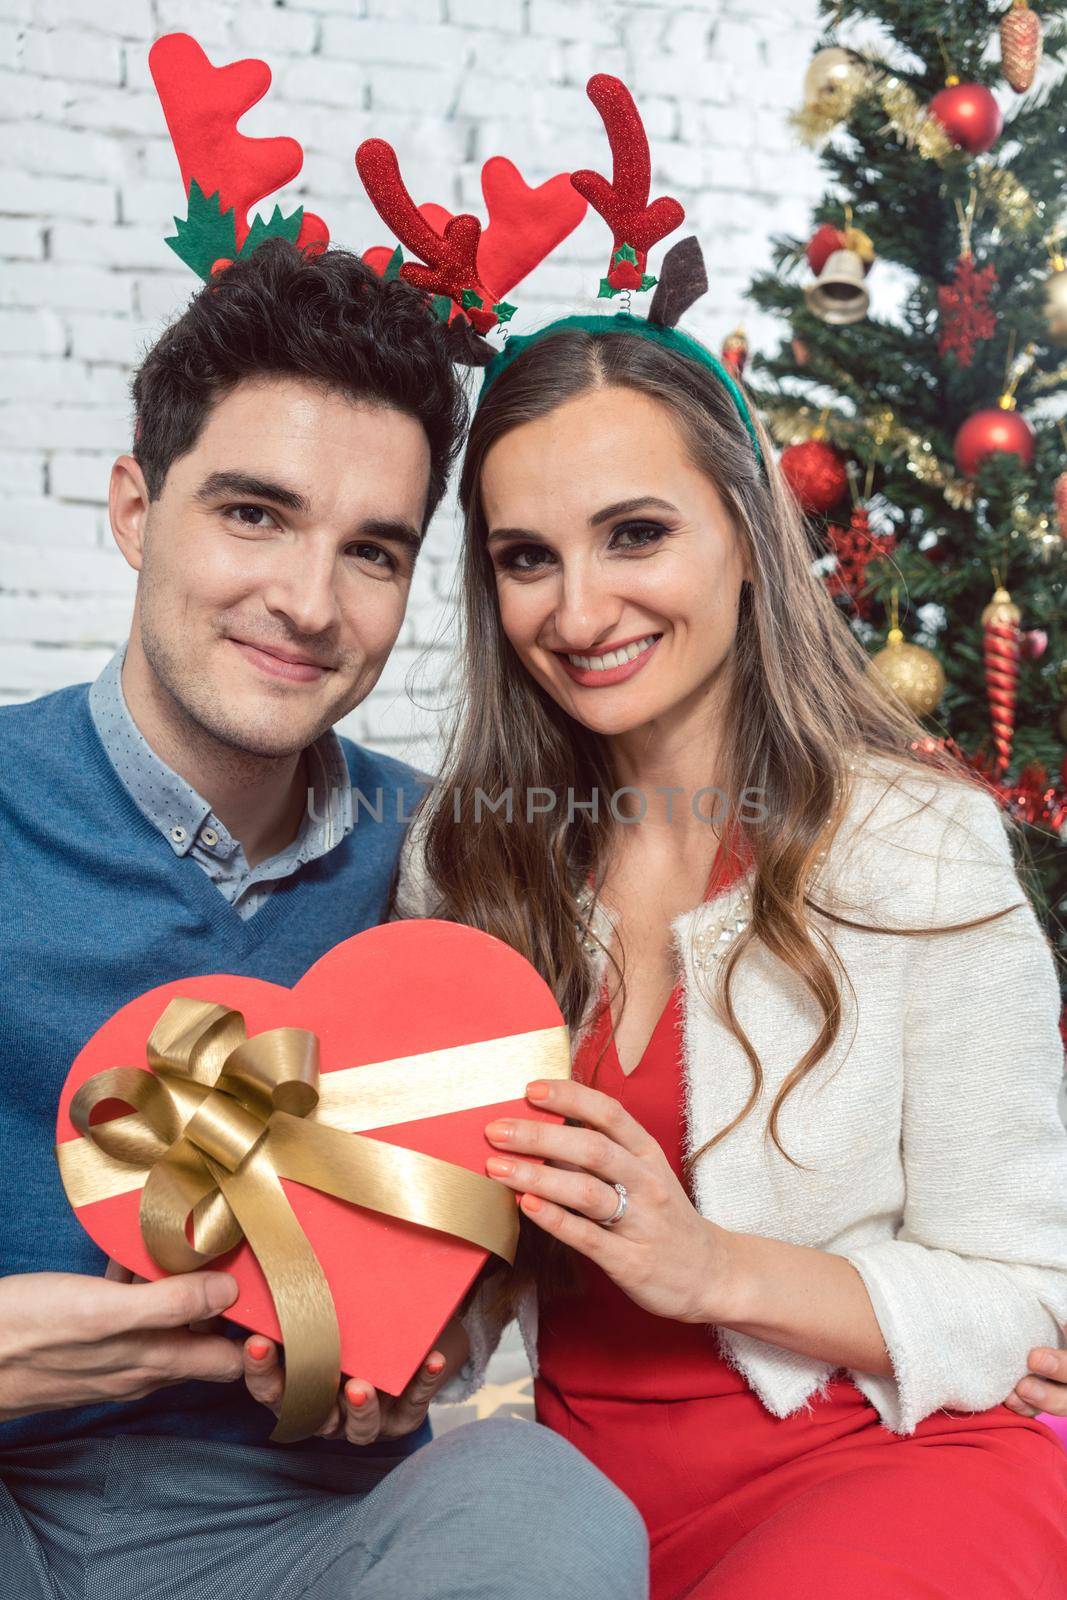 Woman and man in love with presents for Christmas in front of decorated tree